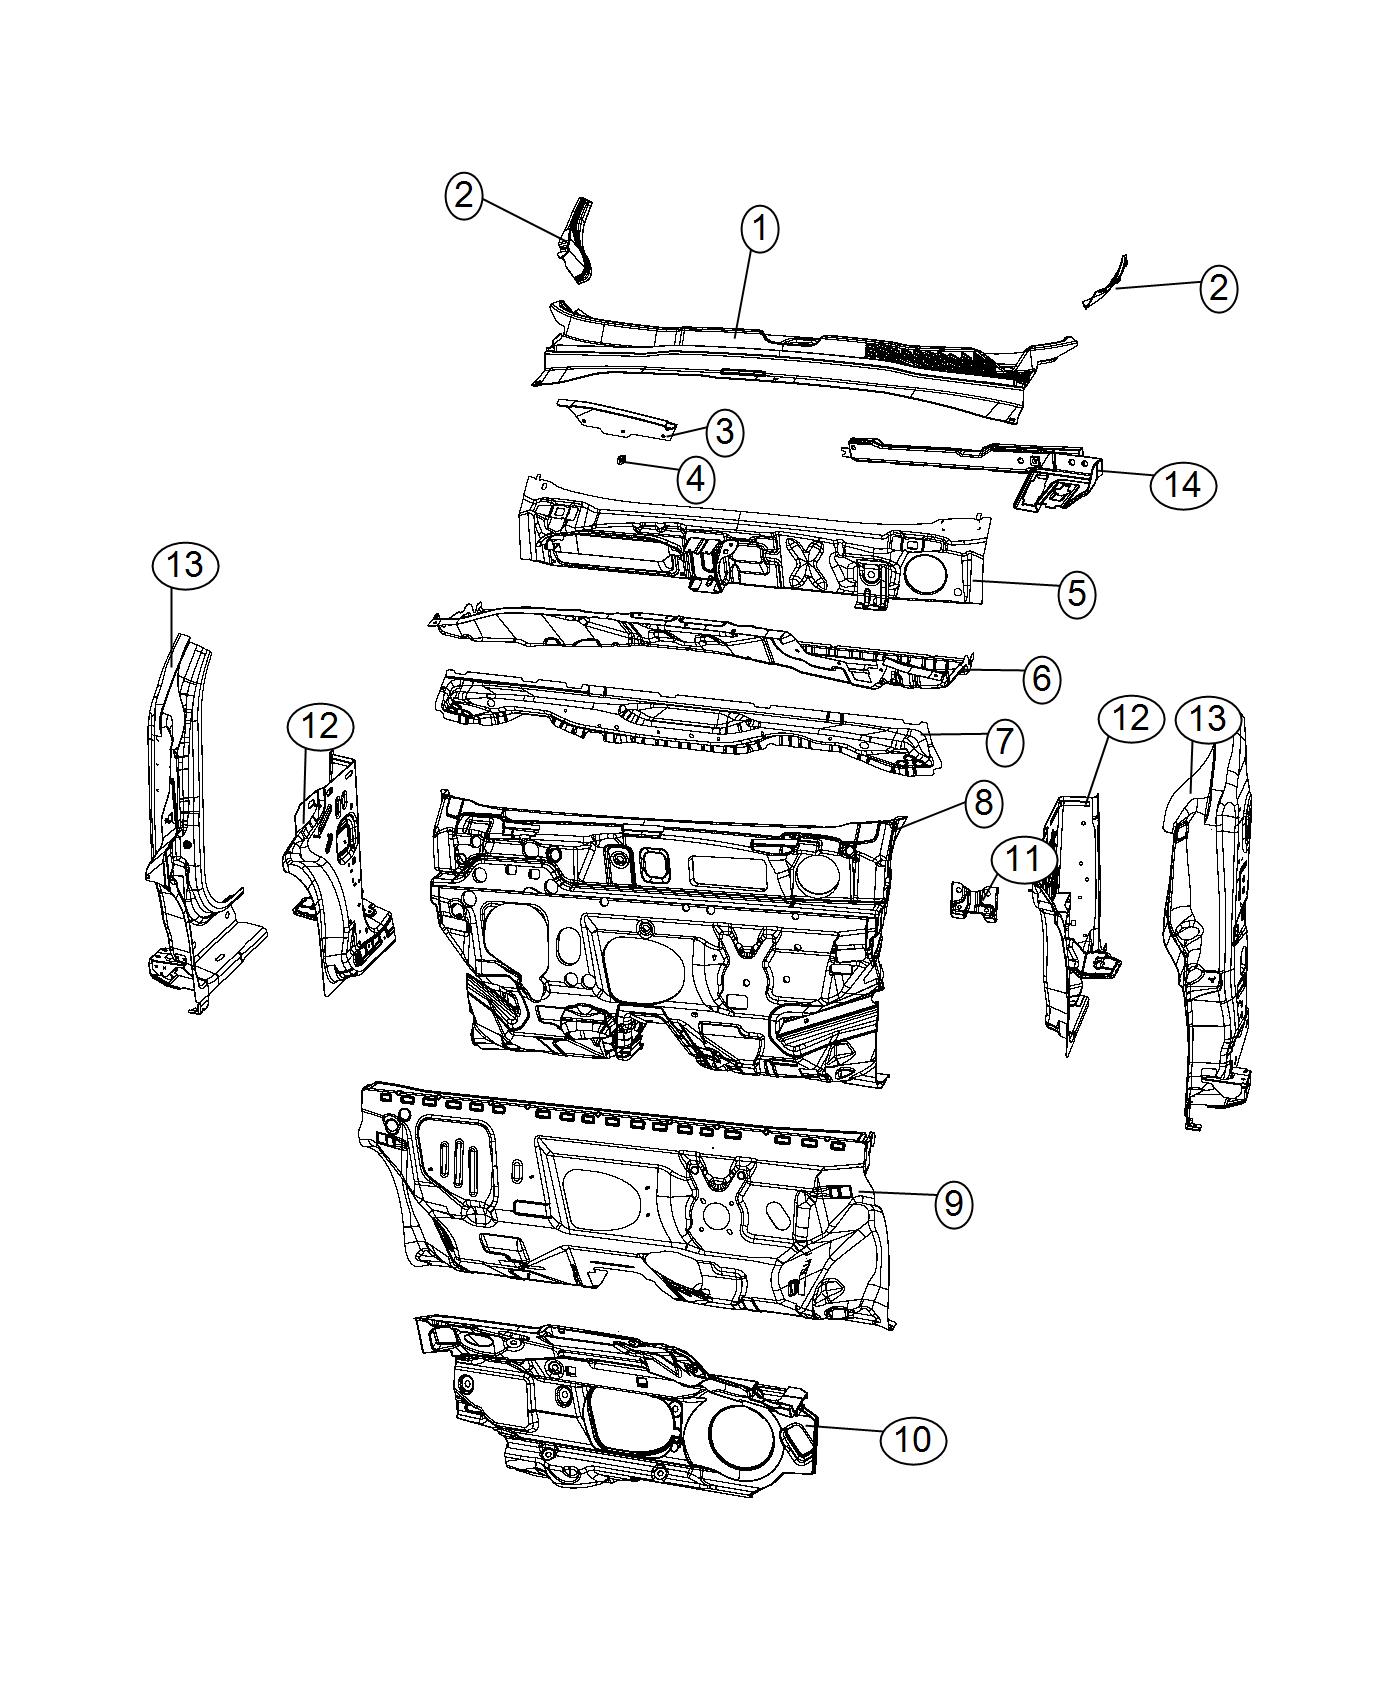 Cowl, Dash Panel and Related Parts. Diagram